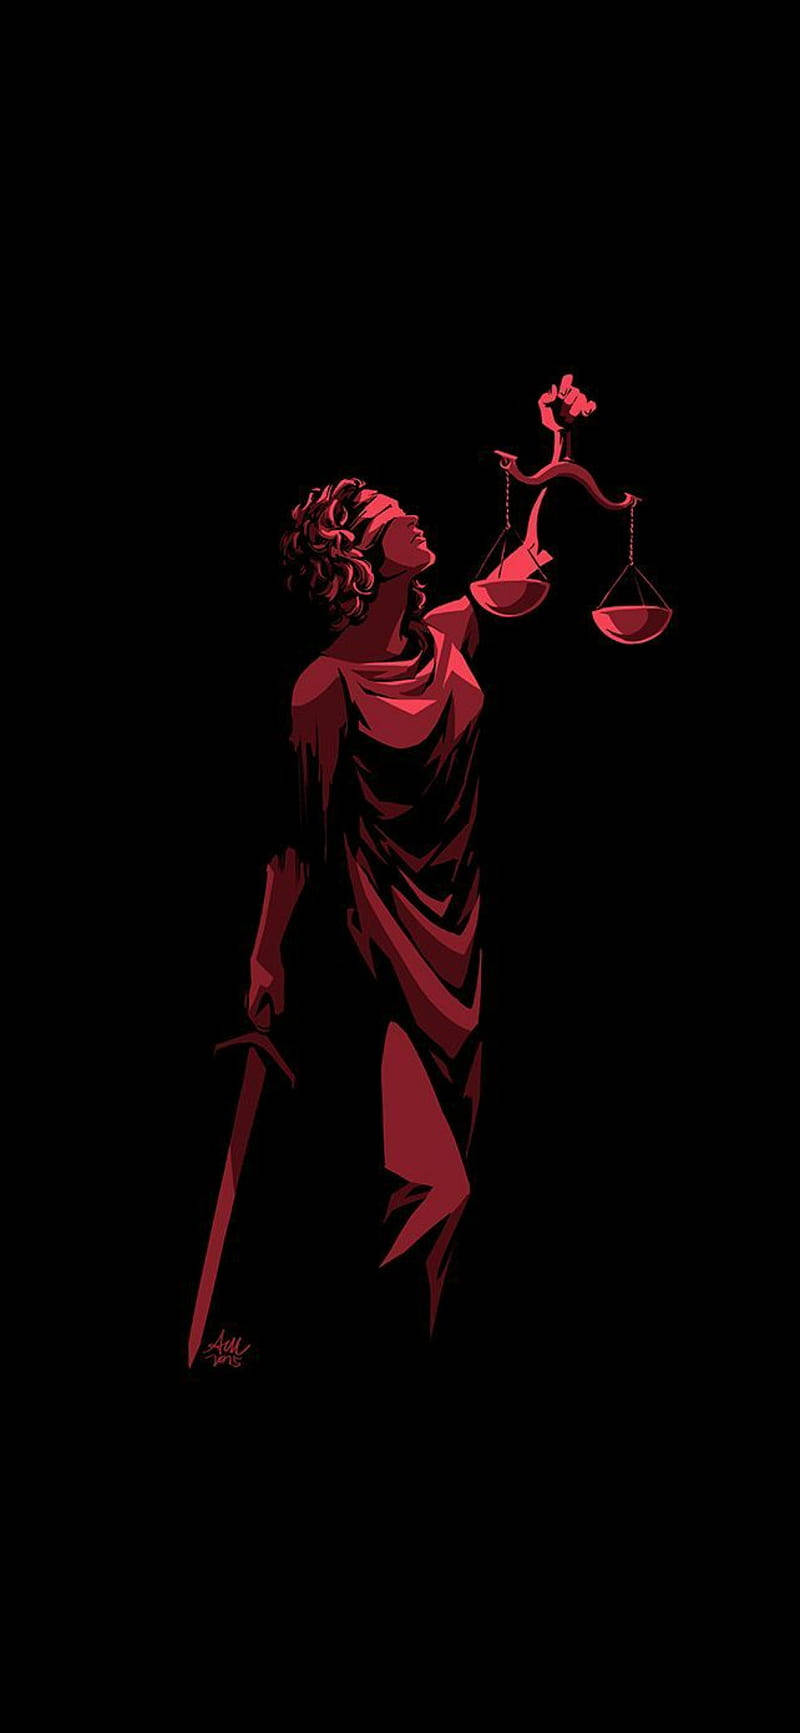 Lady Justice Black And Red Digital Art Wallpaper